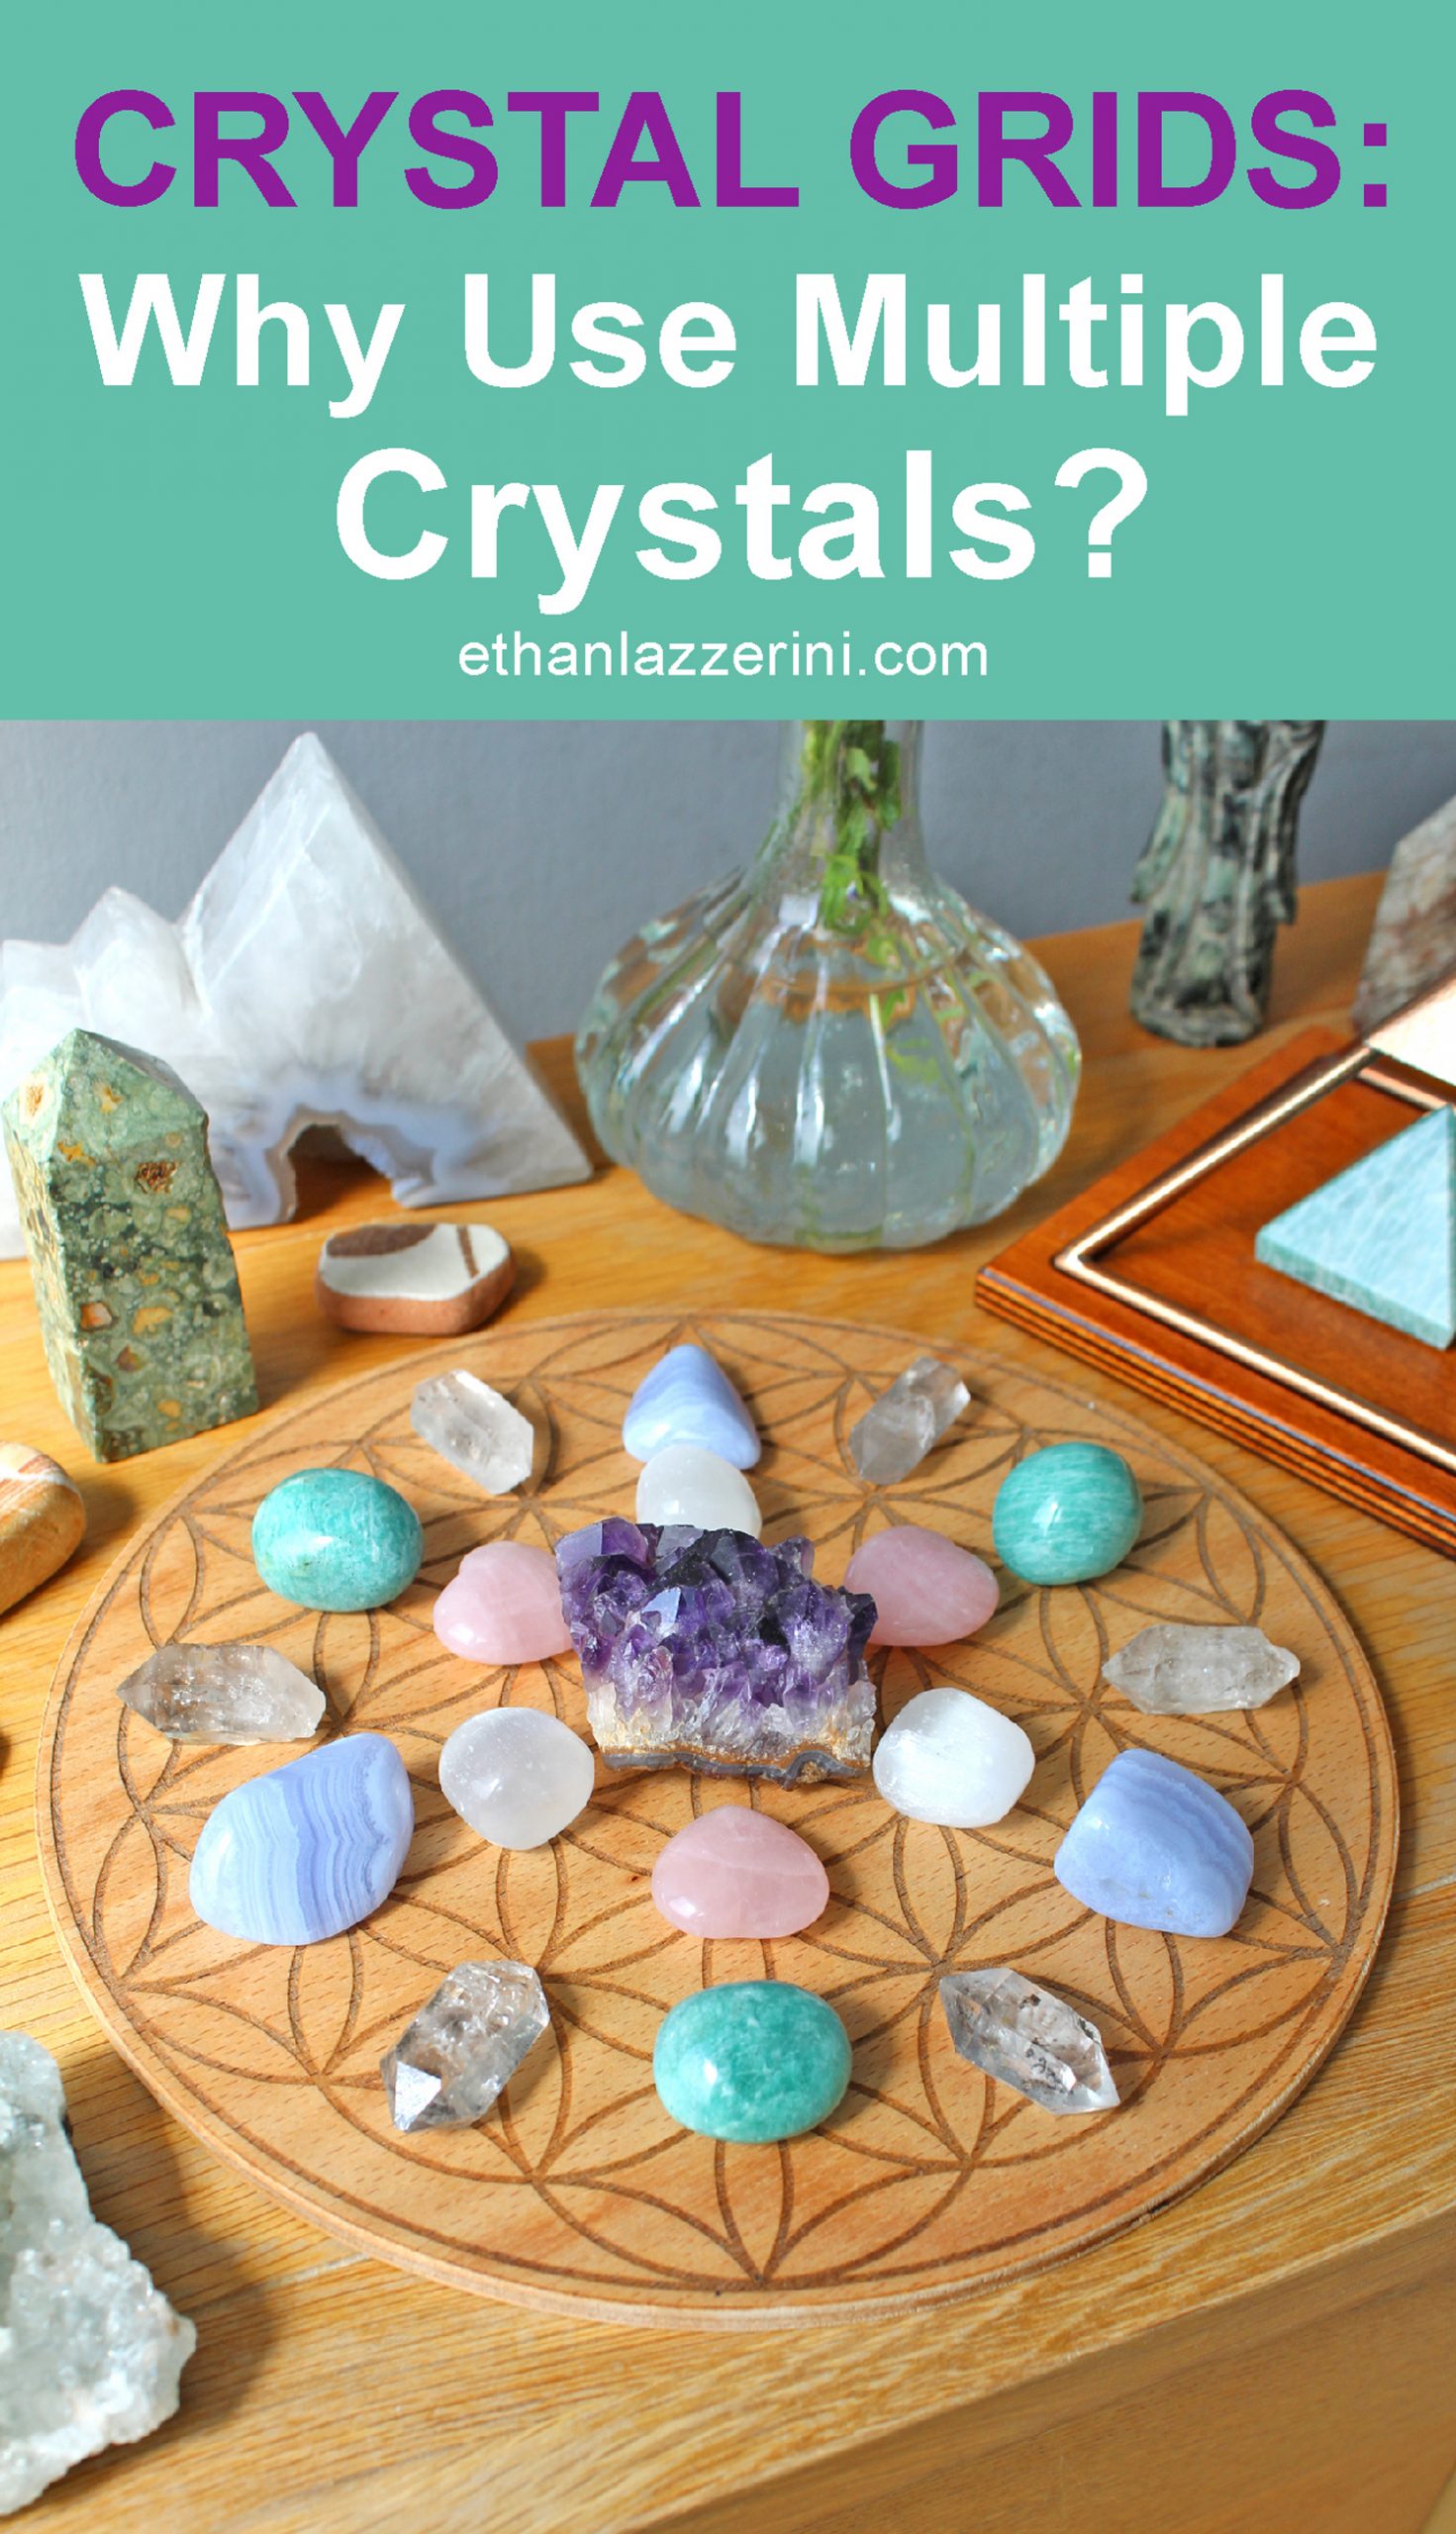 Crystal grid - Why do crystal grids use multiple crystals?